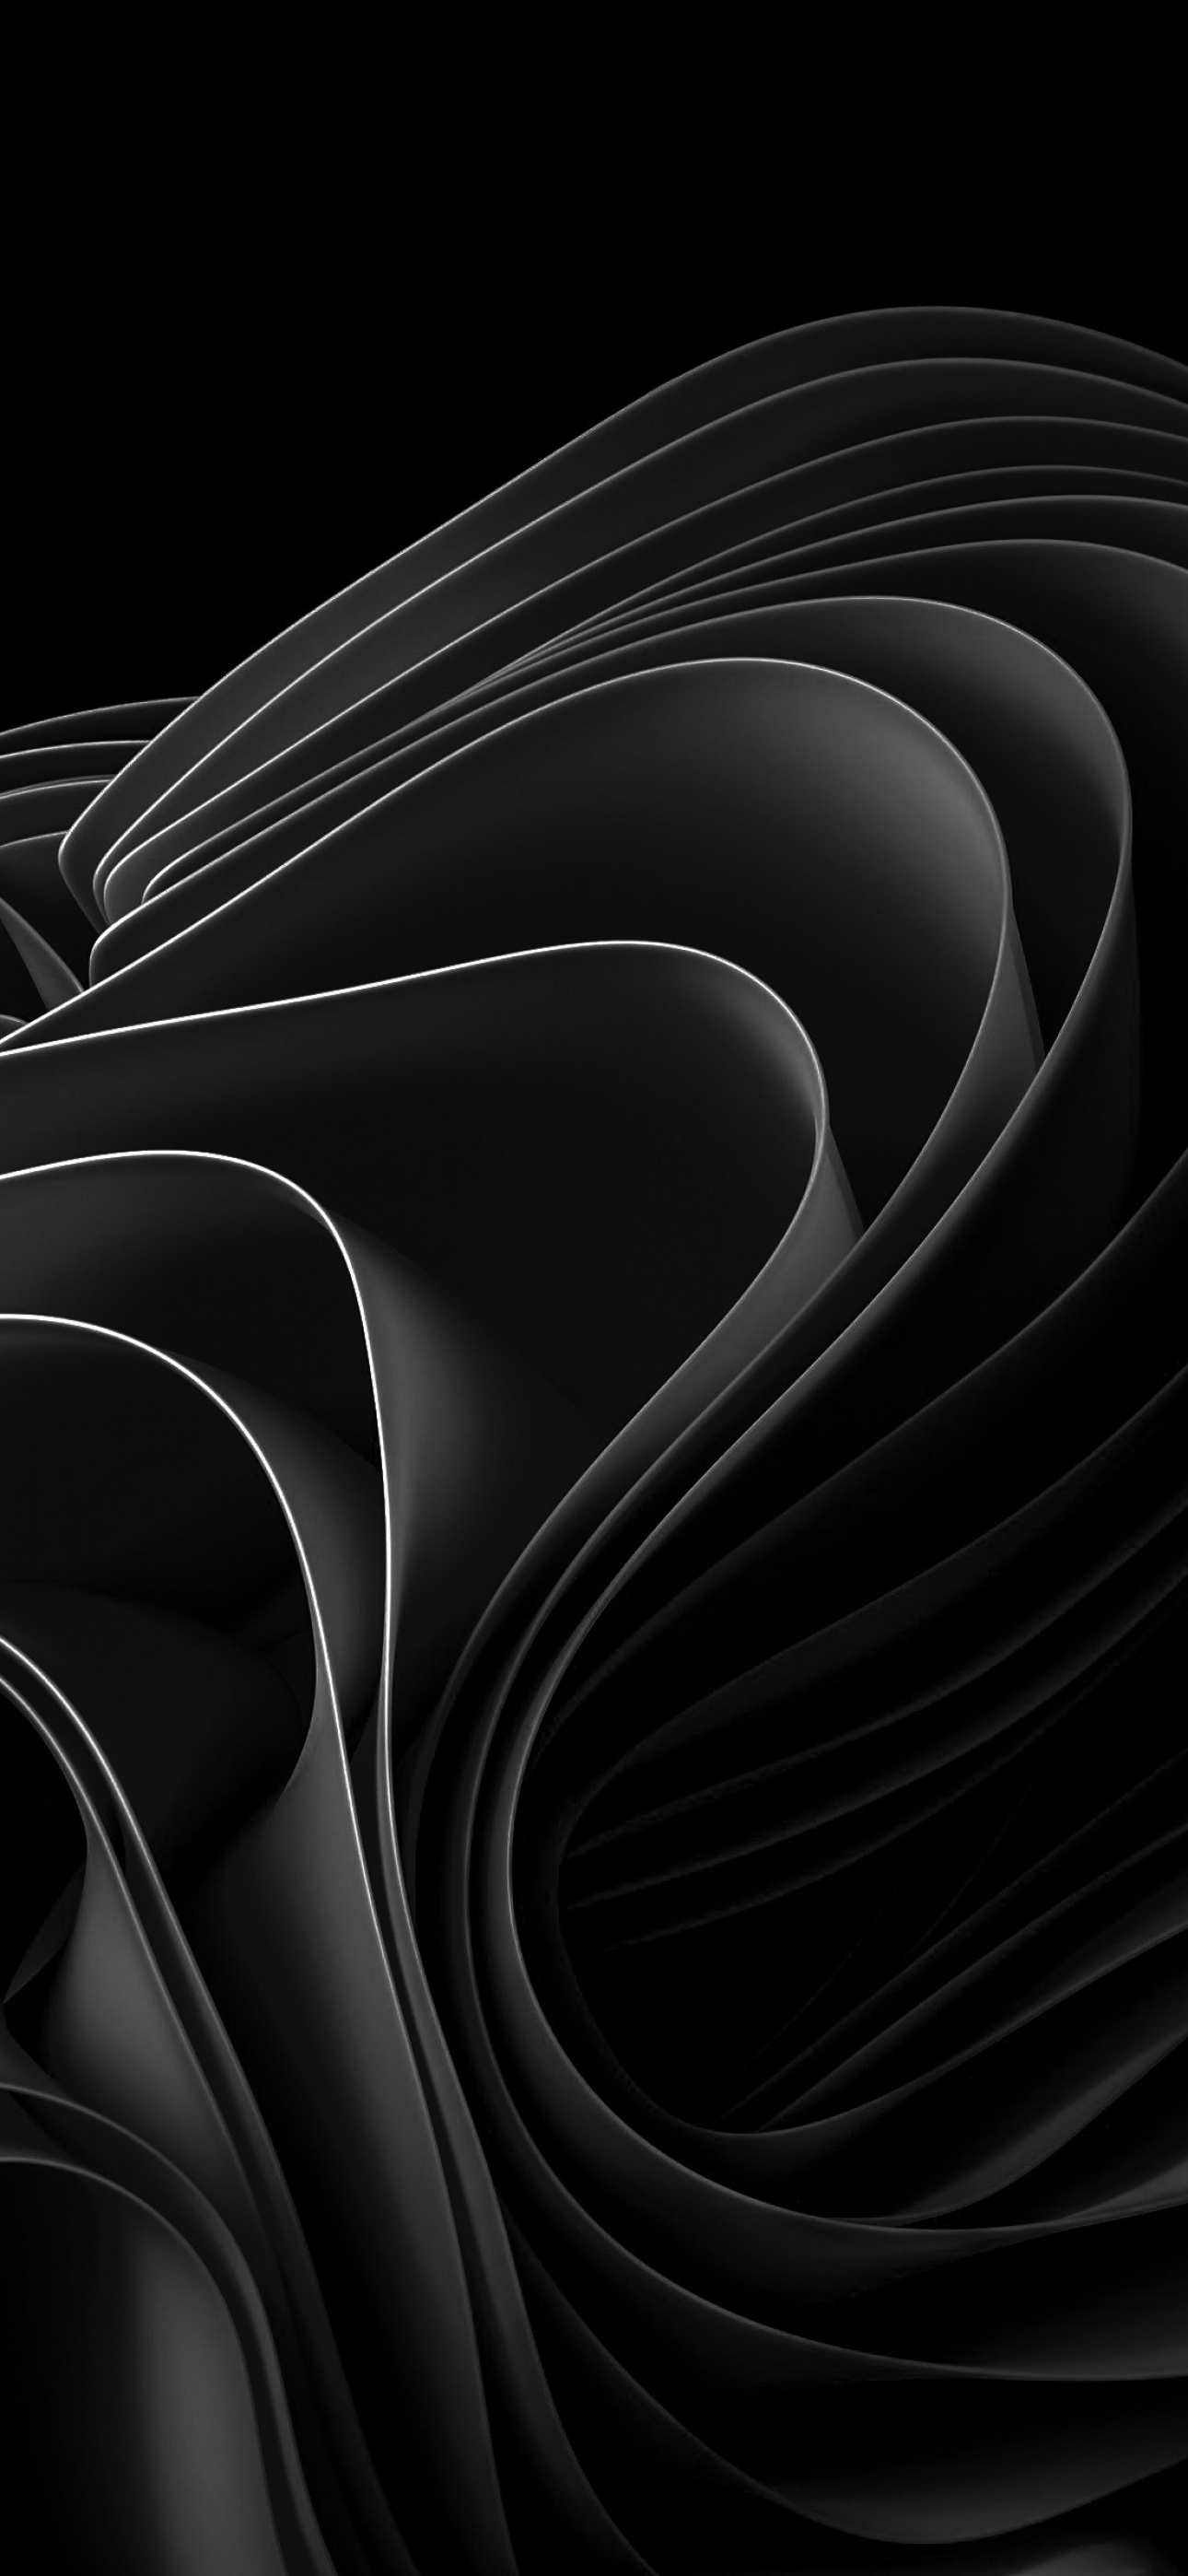 Free Black Abstract Background Photos 200 Black Abstract Background for  FREE  Wallpaperscom